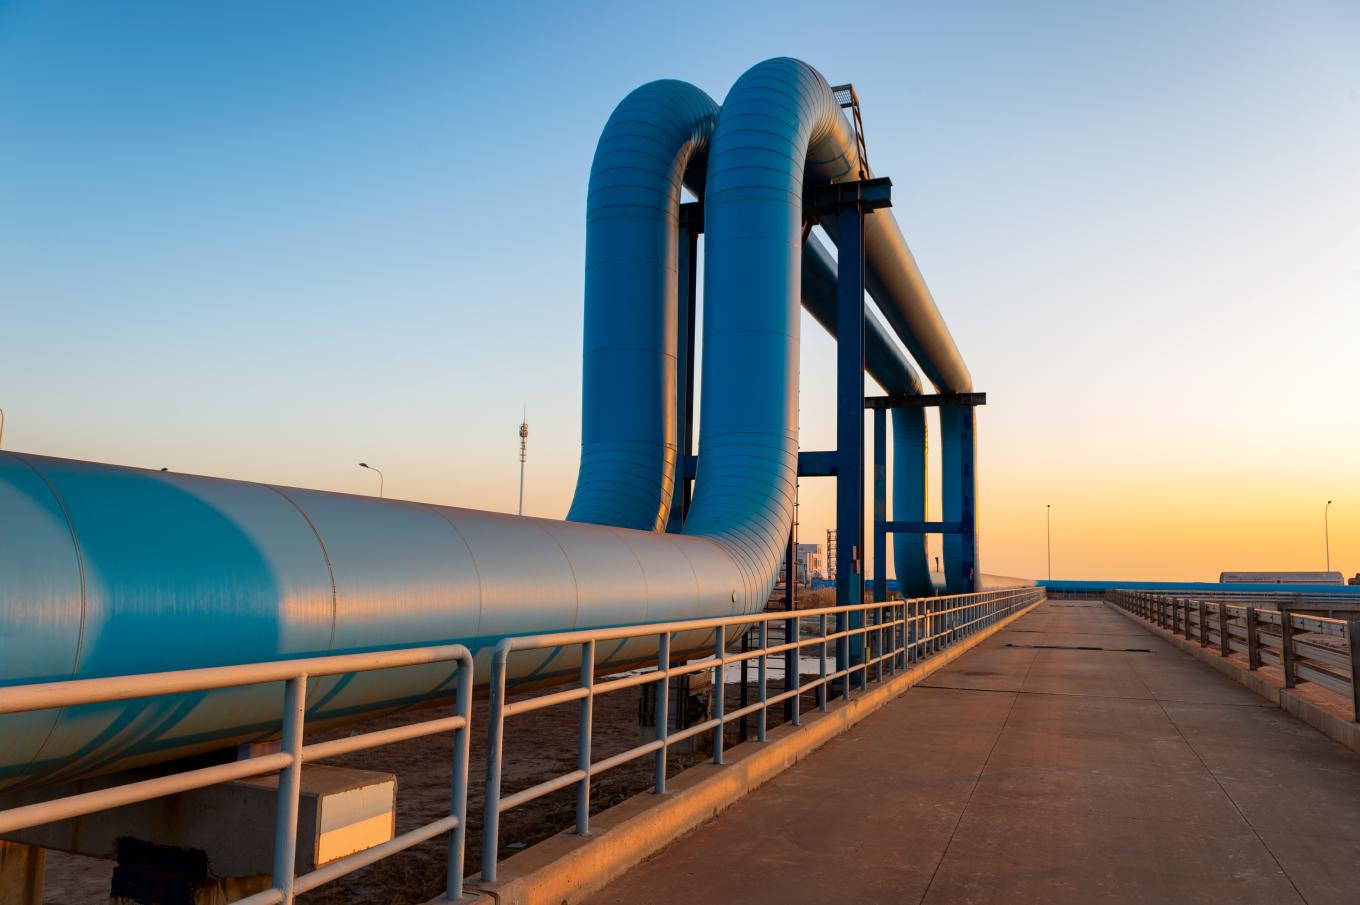 Blue pipes going to oil refinery - stock photo